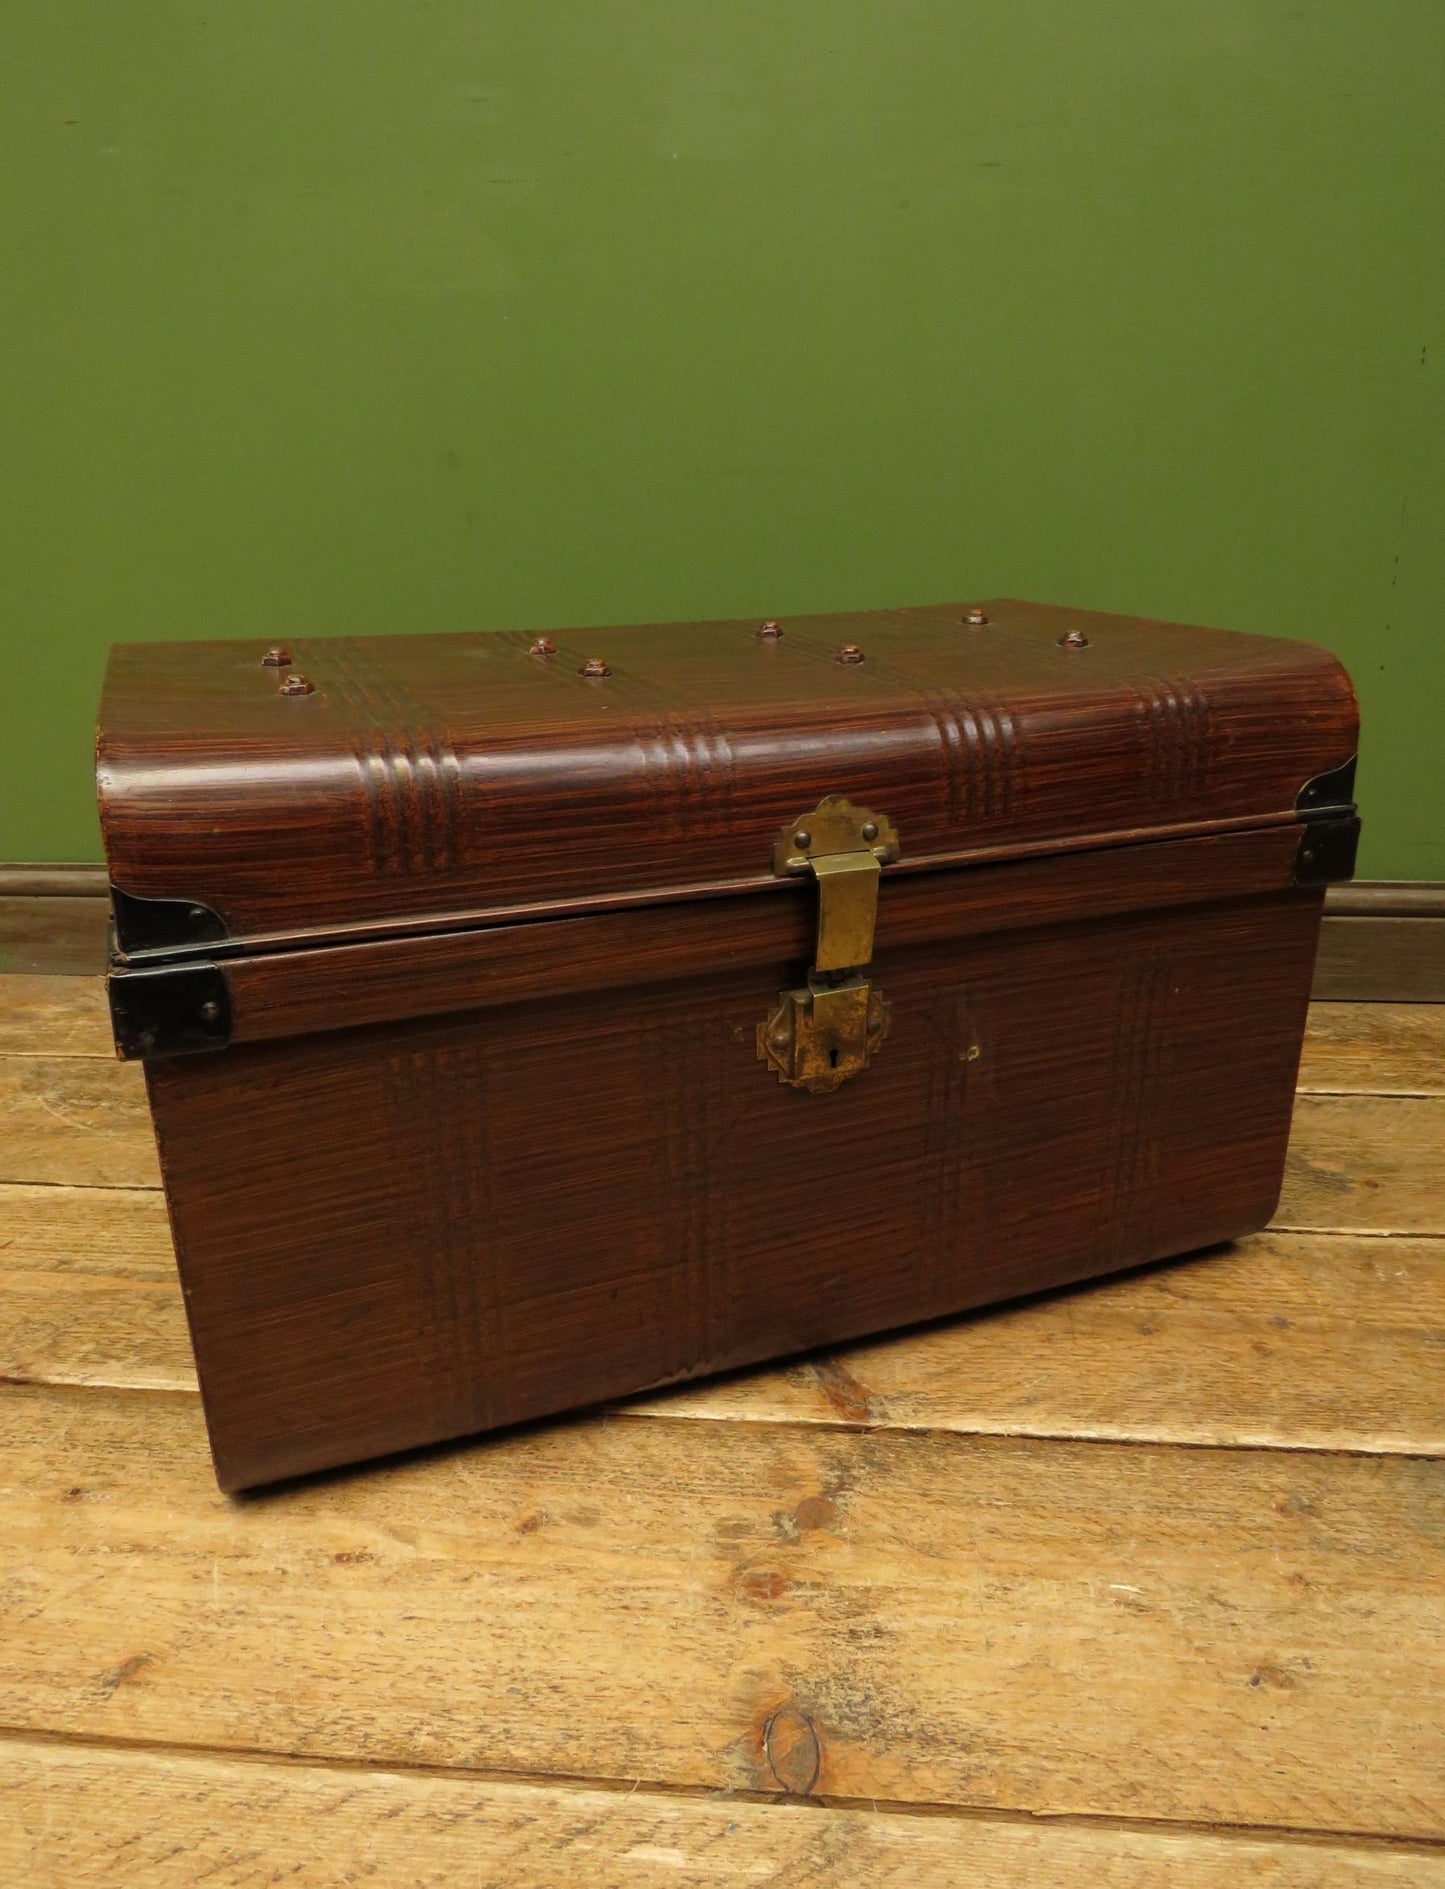 Metal Storage Trunk with Wood Grain finish